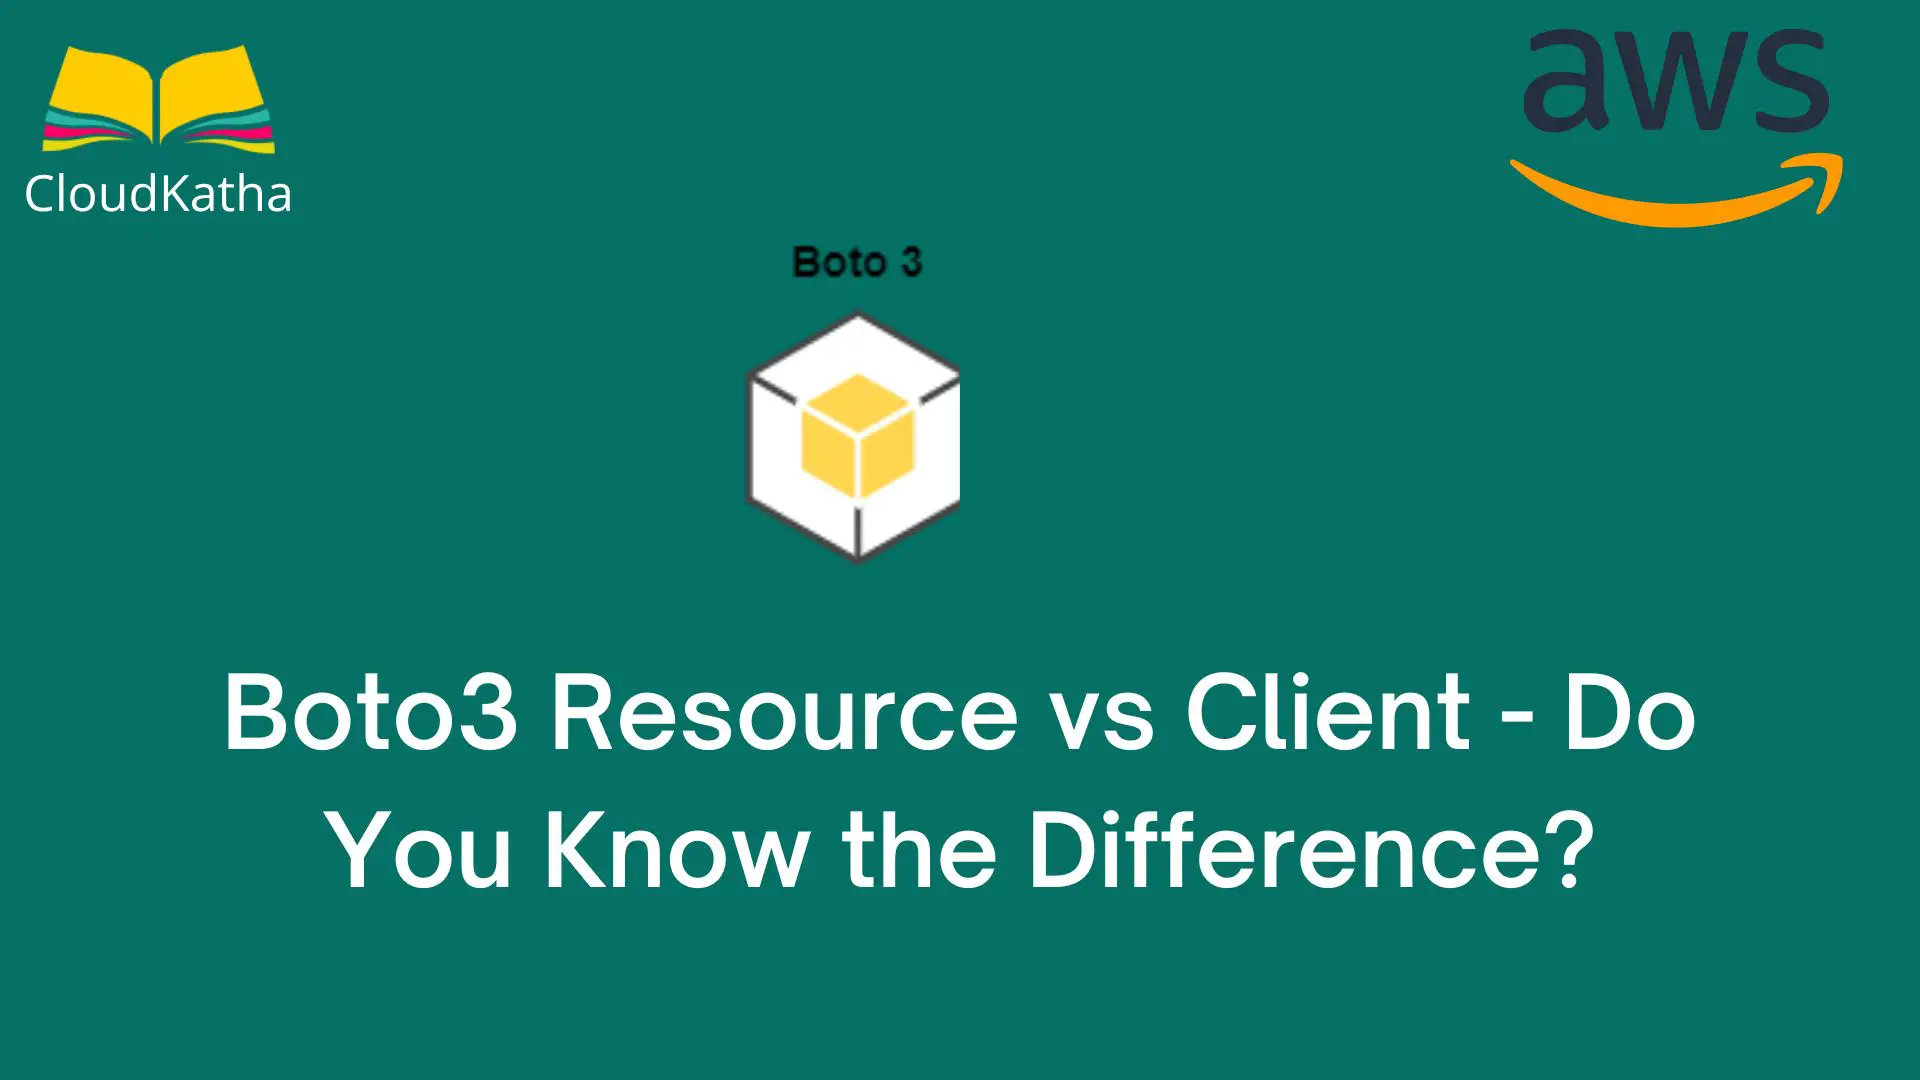 Boto3 Resource vs Client - Do You Know the Difference